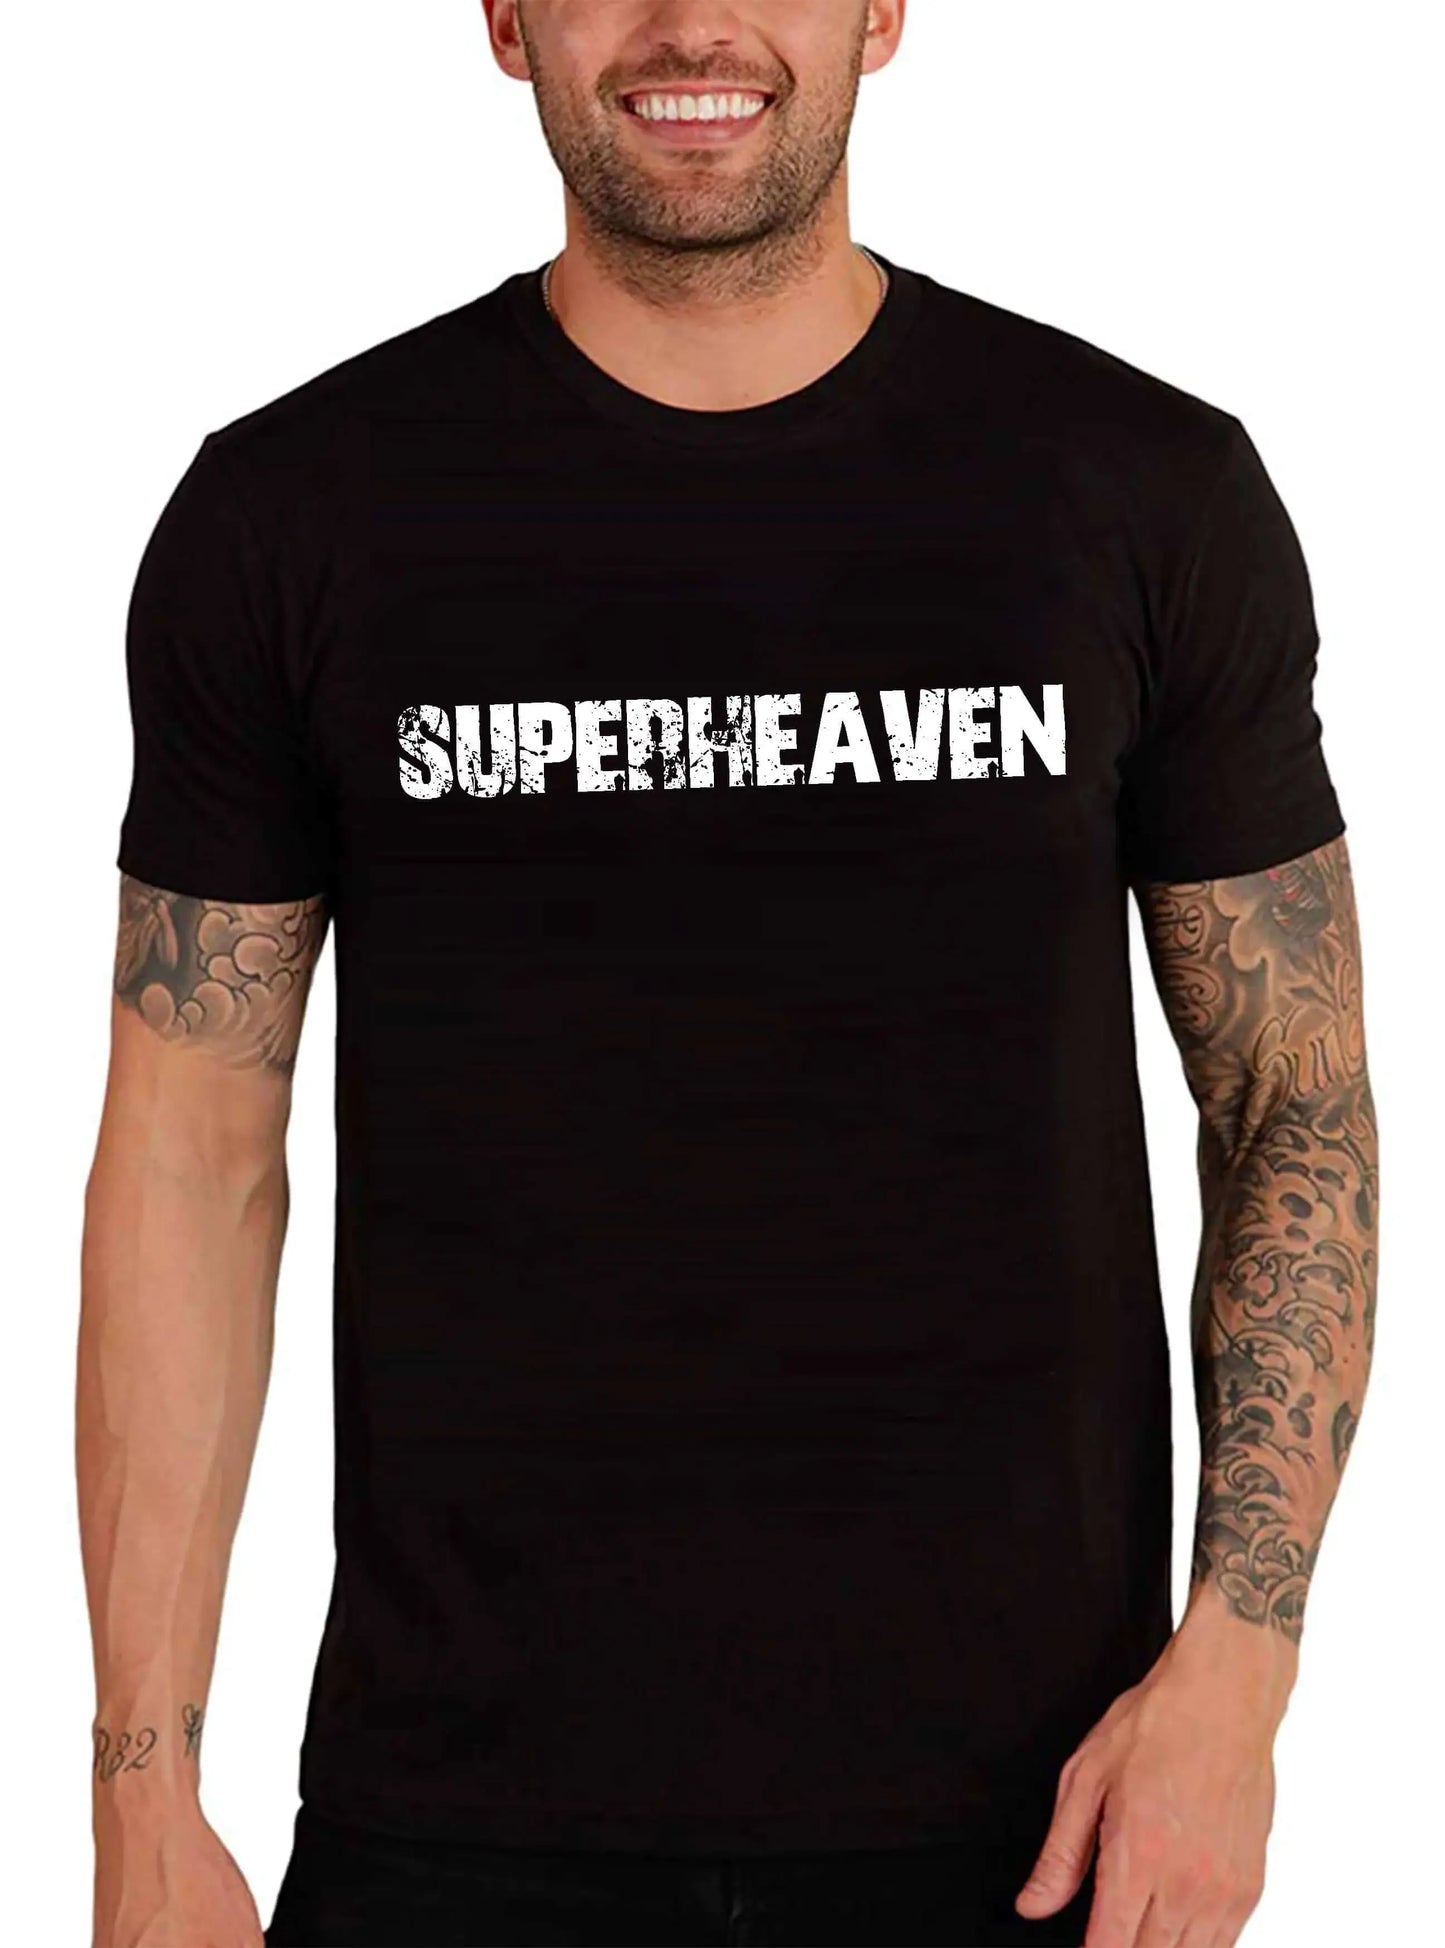 Men's Graphic T-Shirt Superheaven Eco-Friendly Limited Edition Short Sleeve Tee-Shirt Vintage Birthday Gift Novelty